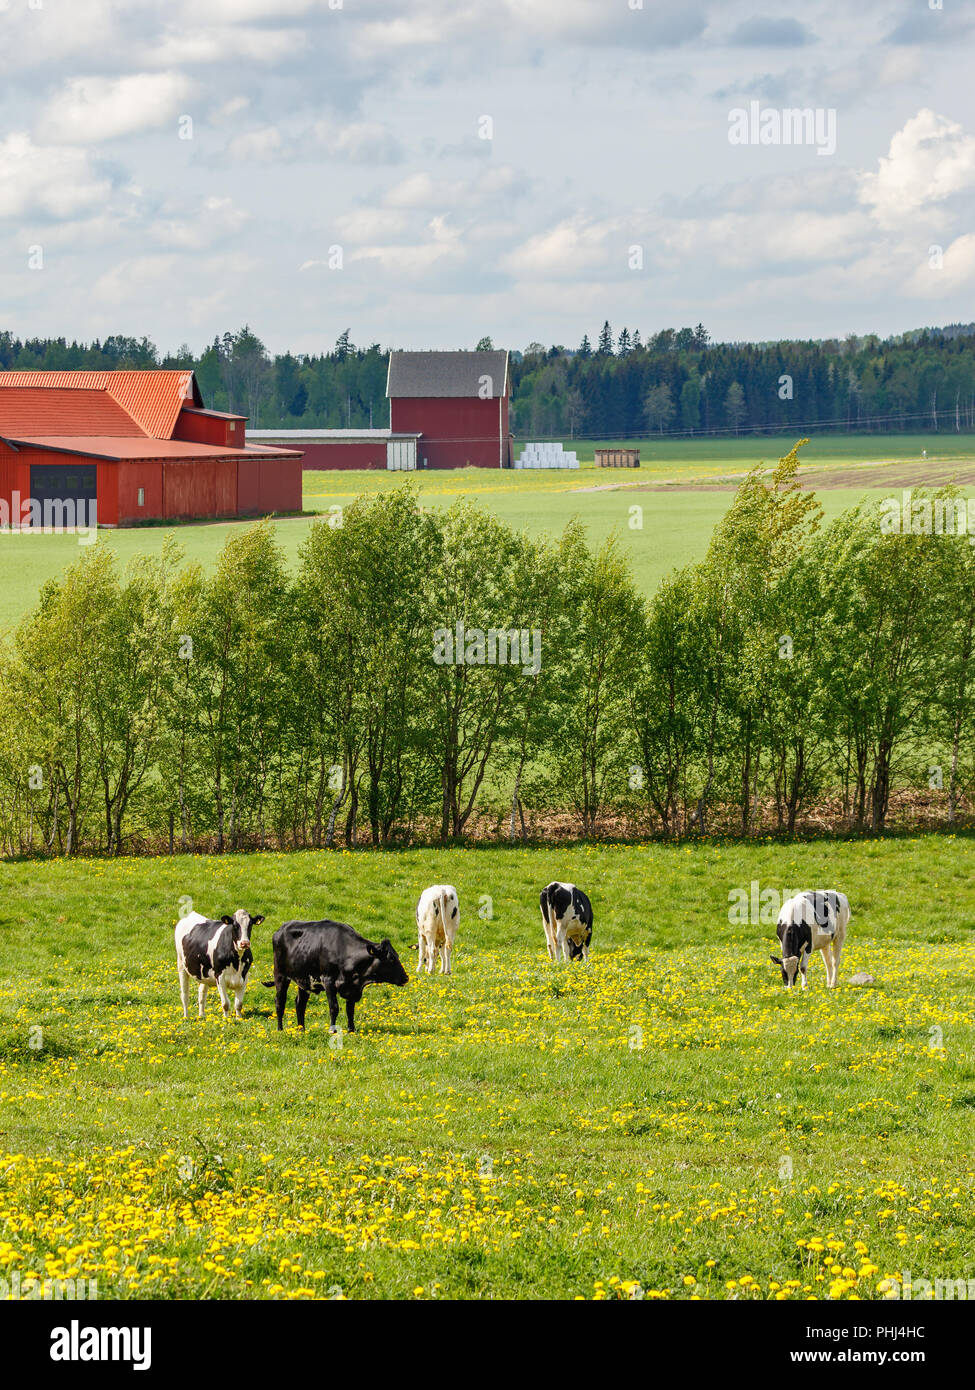 Grazing cows on a summer field in a landscape Stock Photo